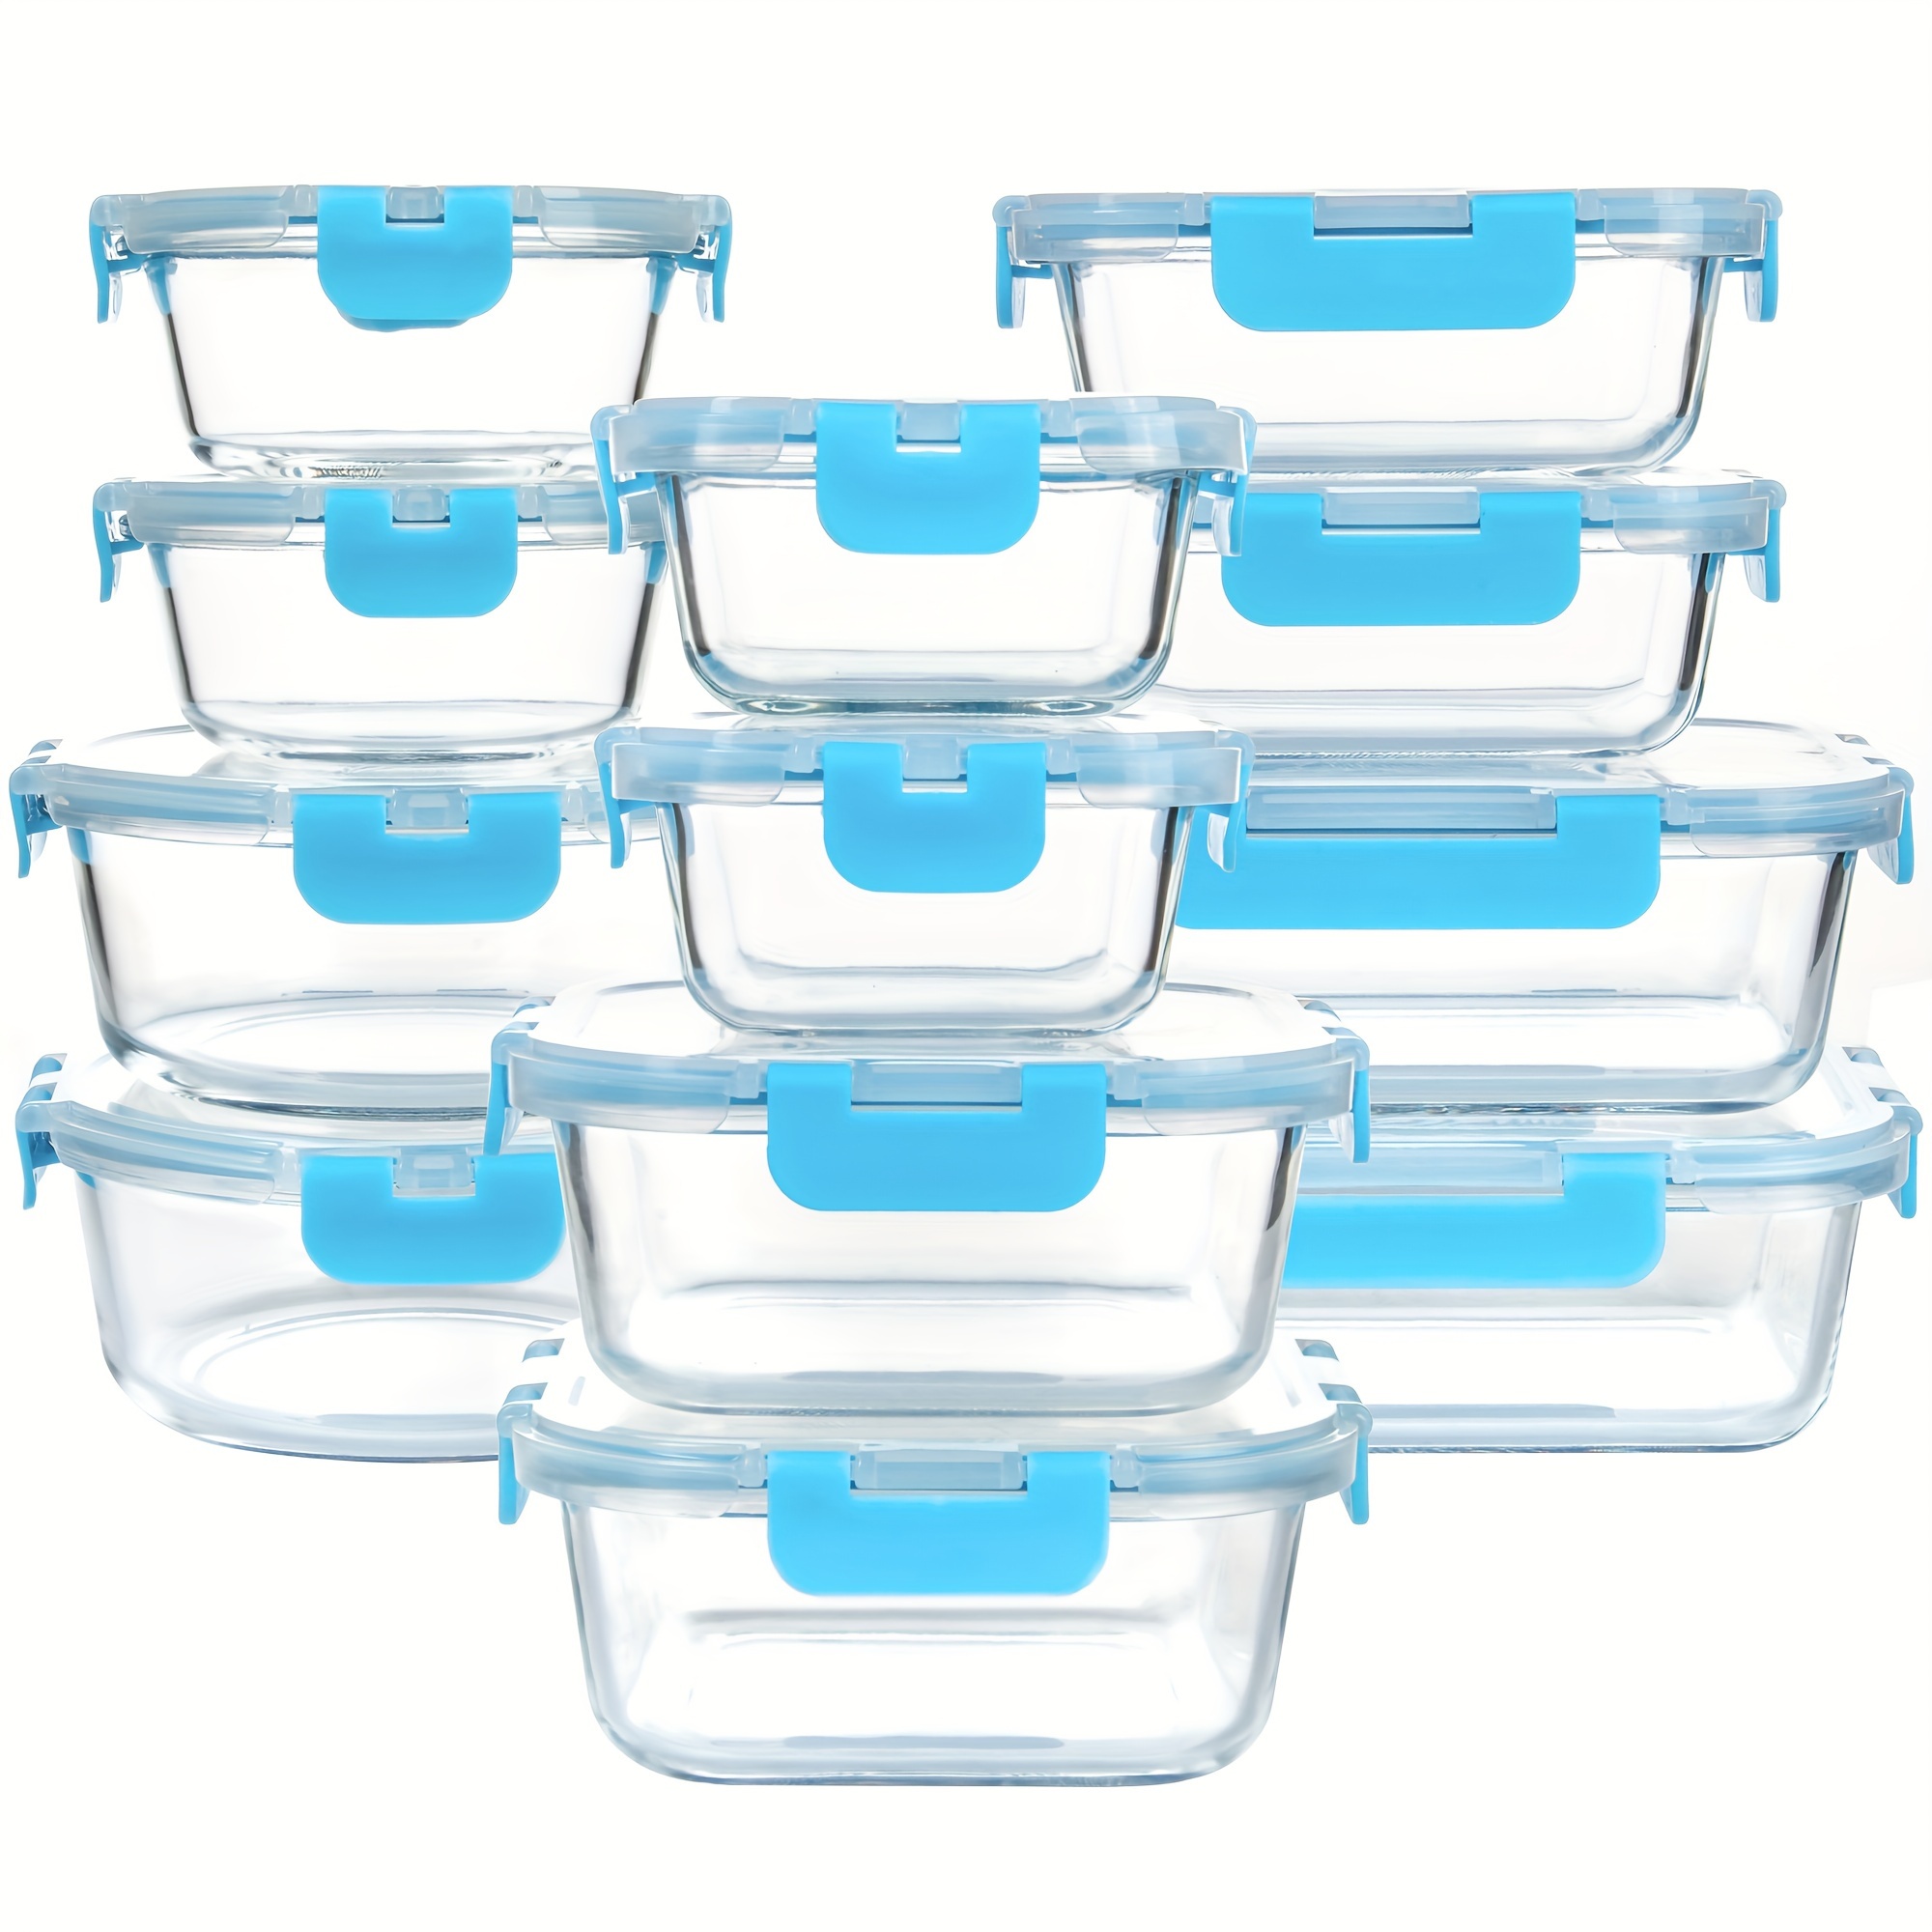 

12 Pack Blue Glass Food Storage Containers Set, Glass Meal Prep Containers With Leak Proof Lids, Airtight Glass Lunch Containers, Ideal For Food Storage, On-the-go, Leftover